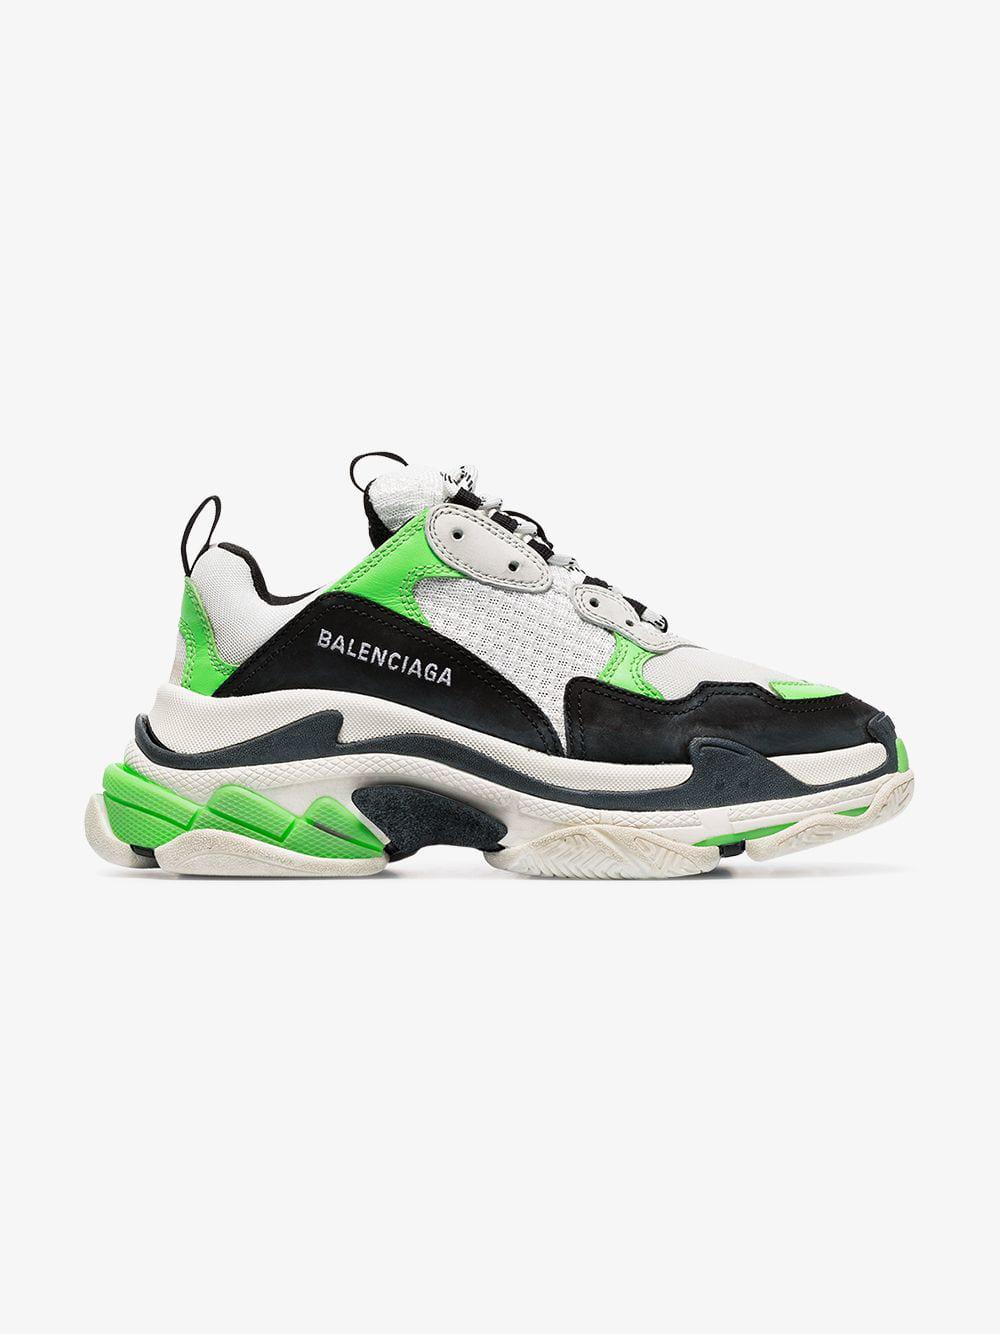 Balenciaga Synthetic Neon Green And Black Triple S Sneakers in White | Lyst